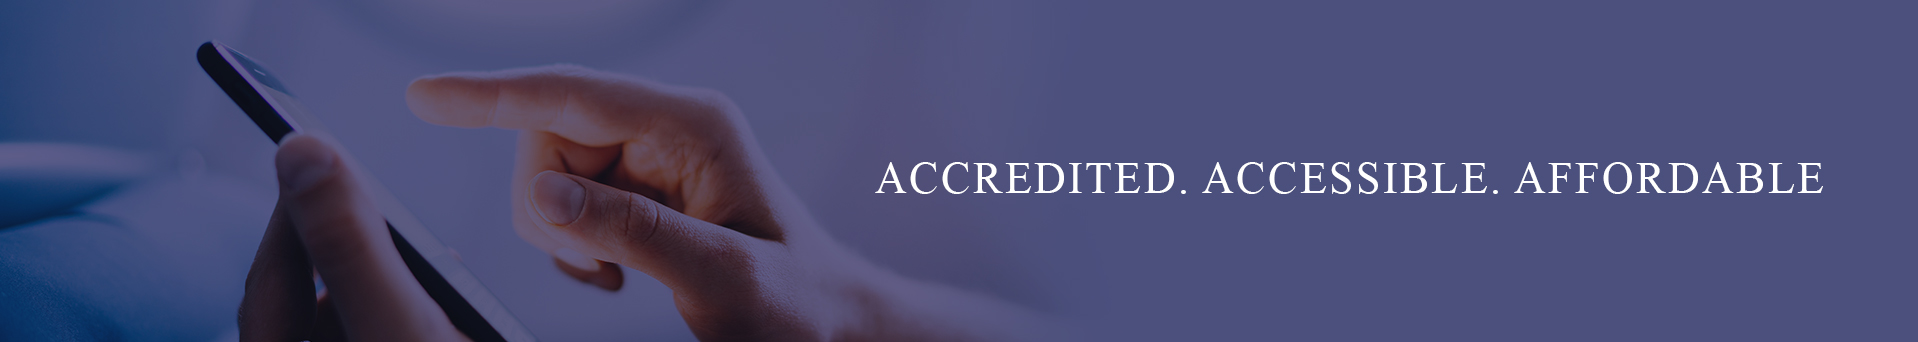 ACCREDITED. ACCESSIBLE. AFFORDABLE